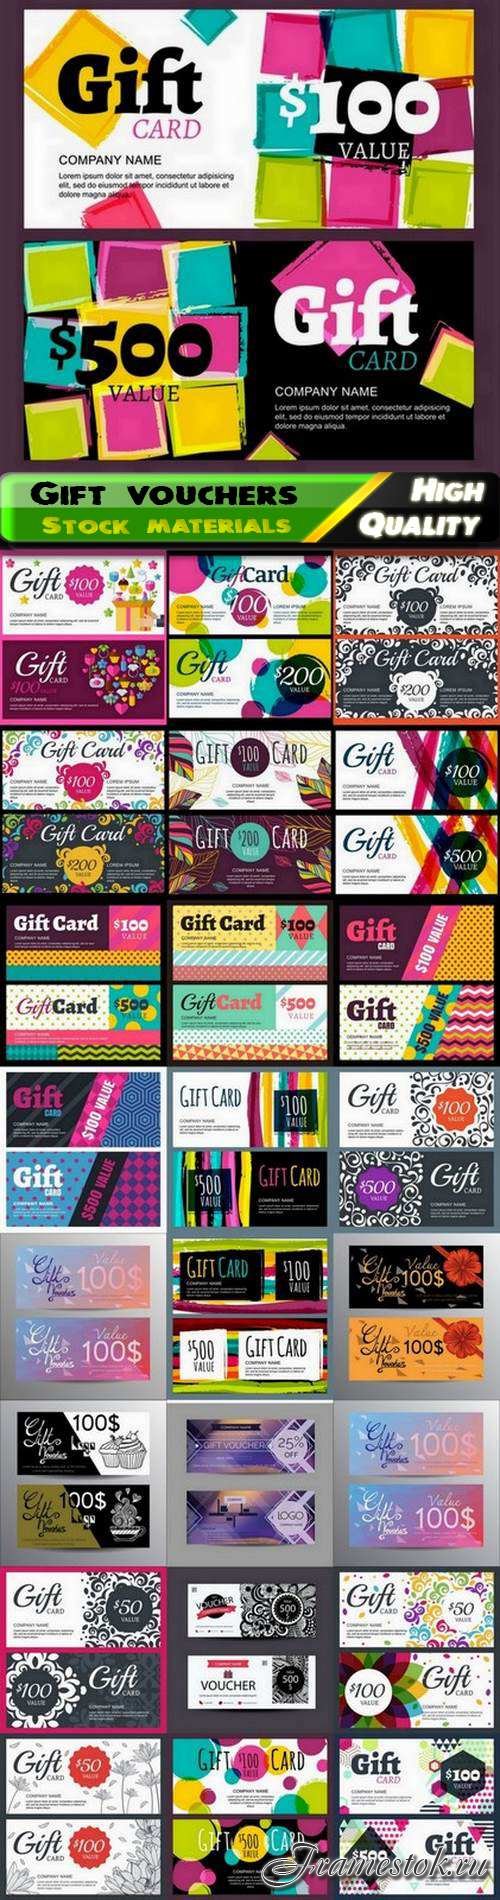 Discount coupon and gift voucher for business advertising - 25 Eps